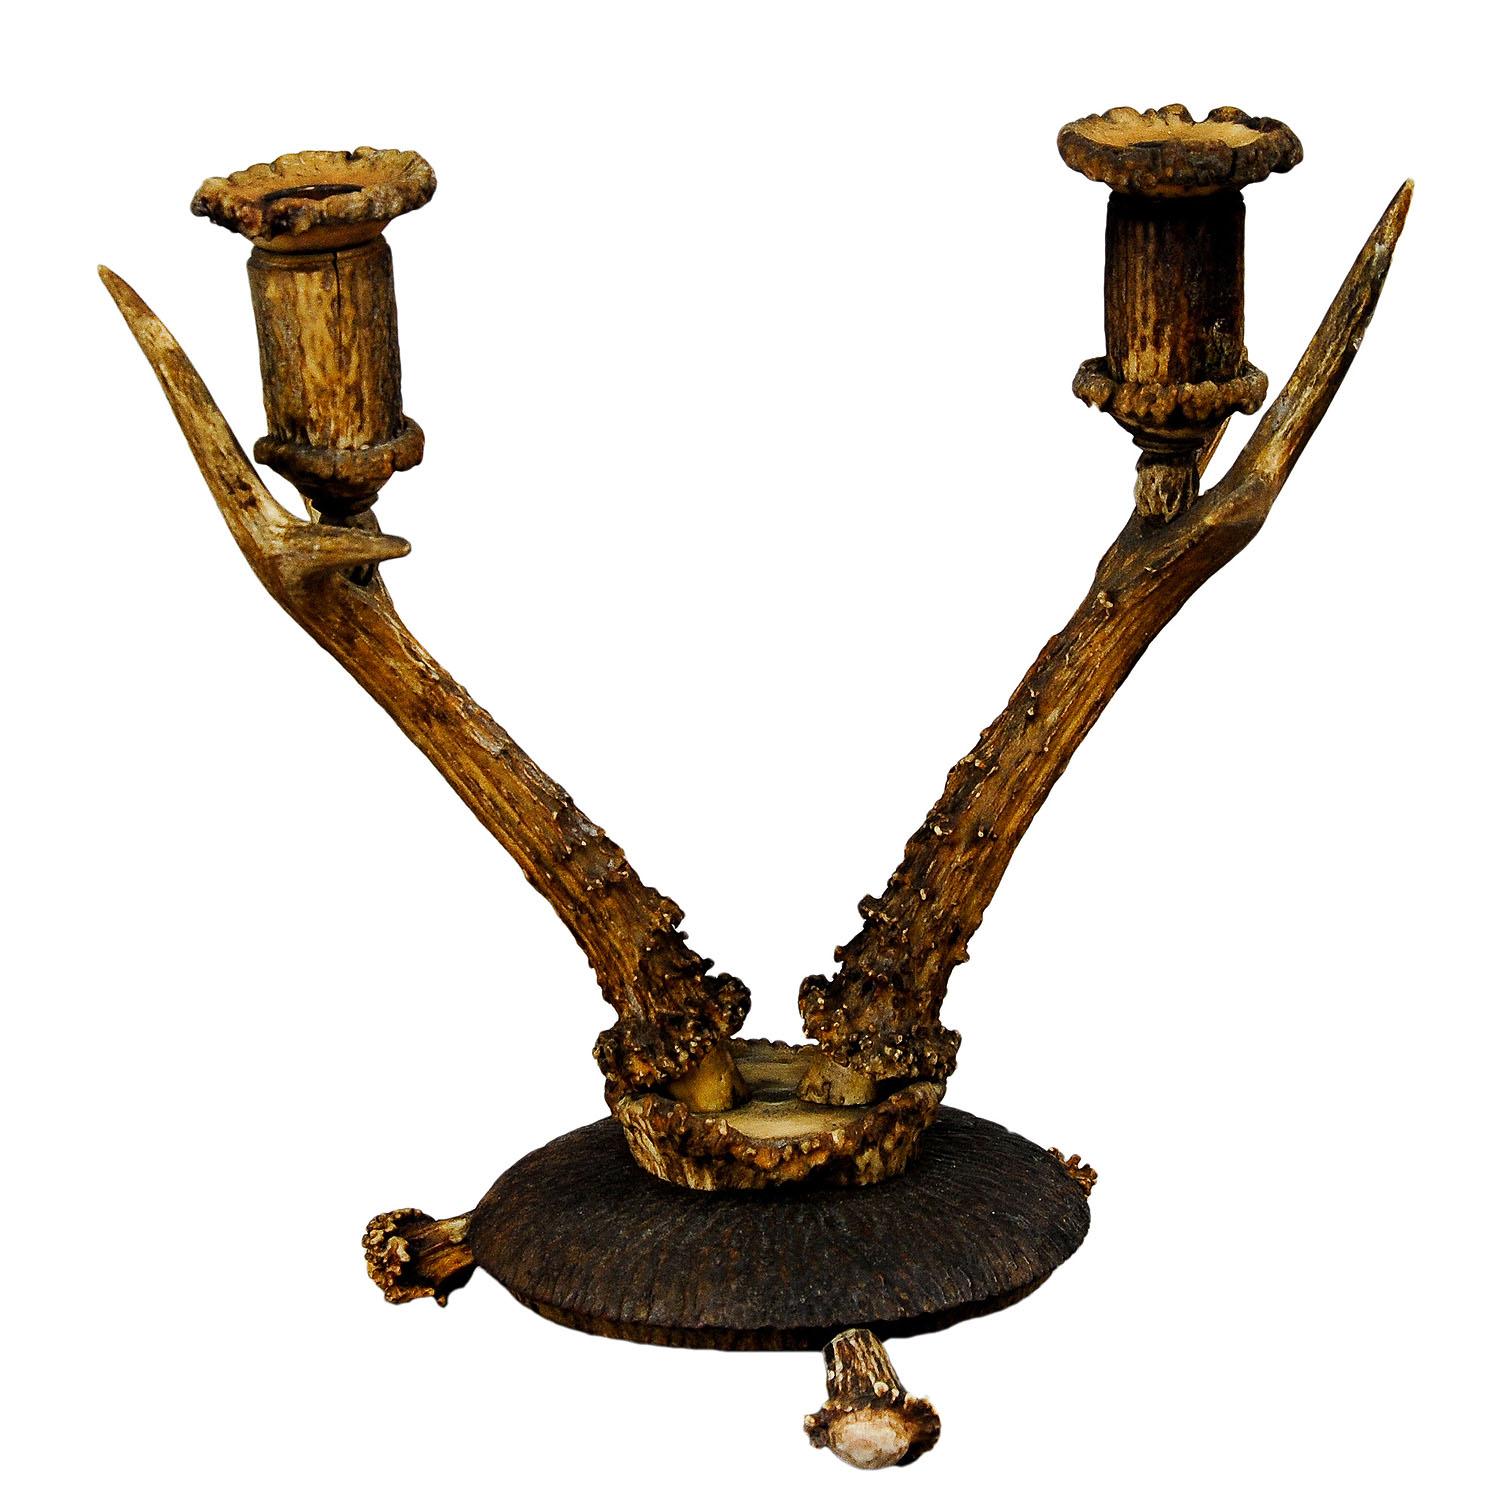 Antique Cabin Decor Two-Armed Antler Candlestick 1900

A rare antique candleholder which is made of roebuck antlers pieces. It was executed ca. 1900.

Antler furniture have been one of the popular novelties of the great exhibition of the industries